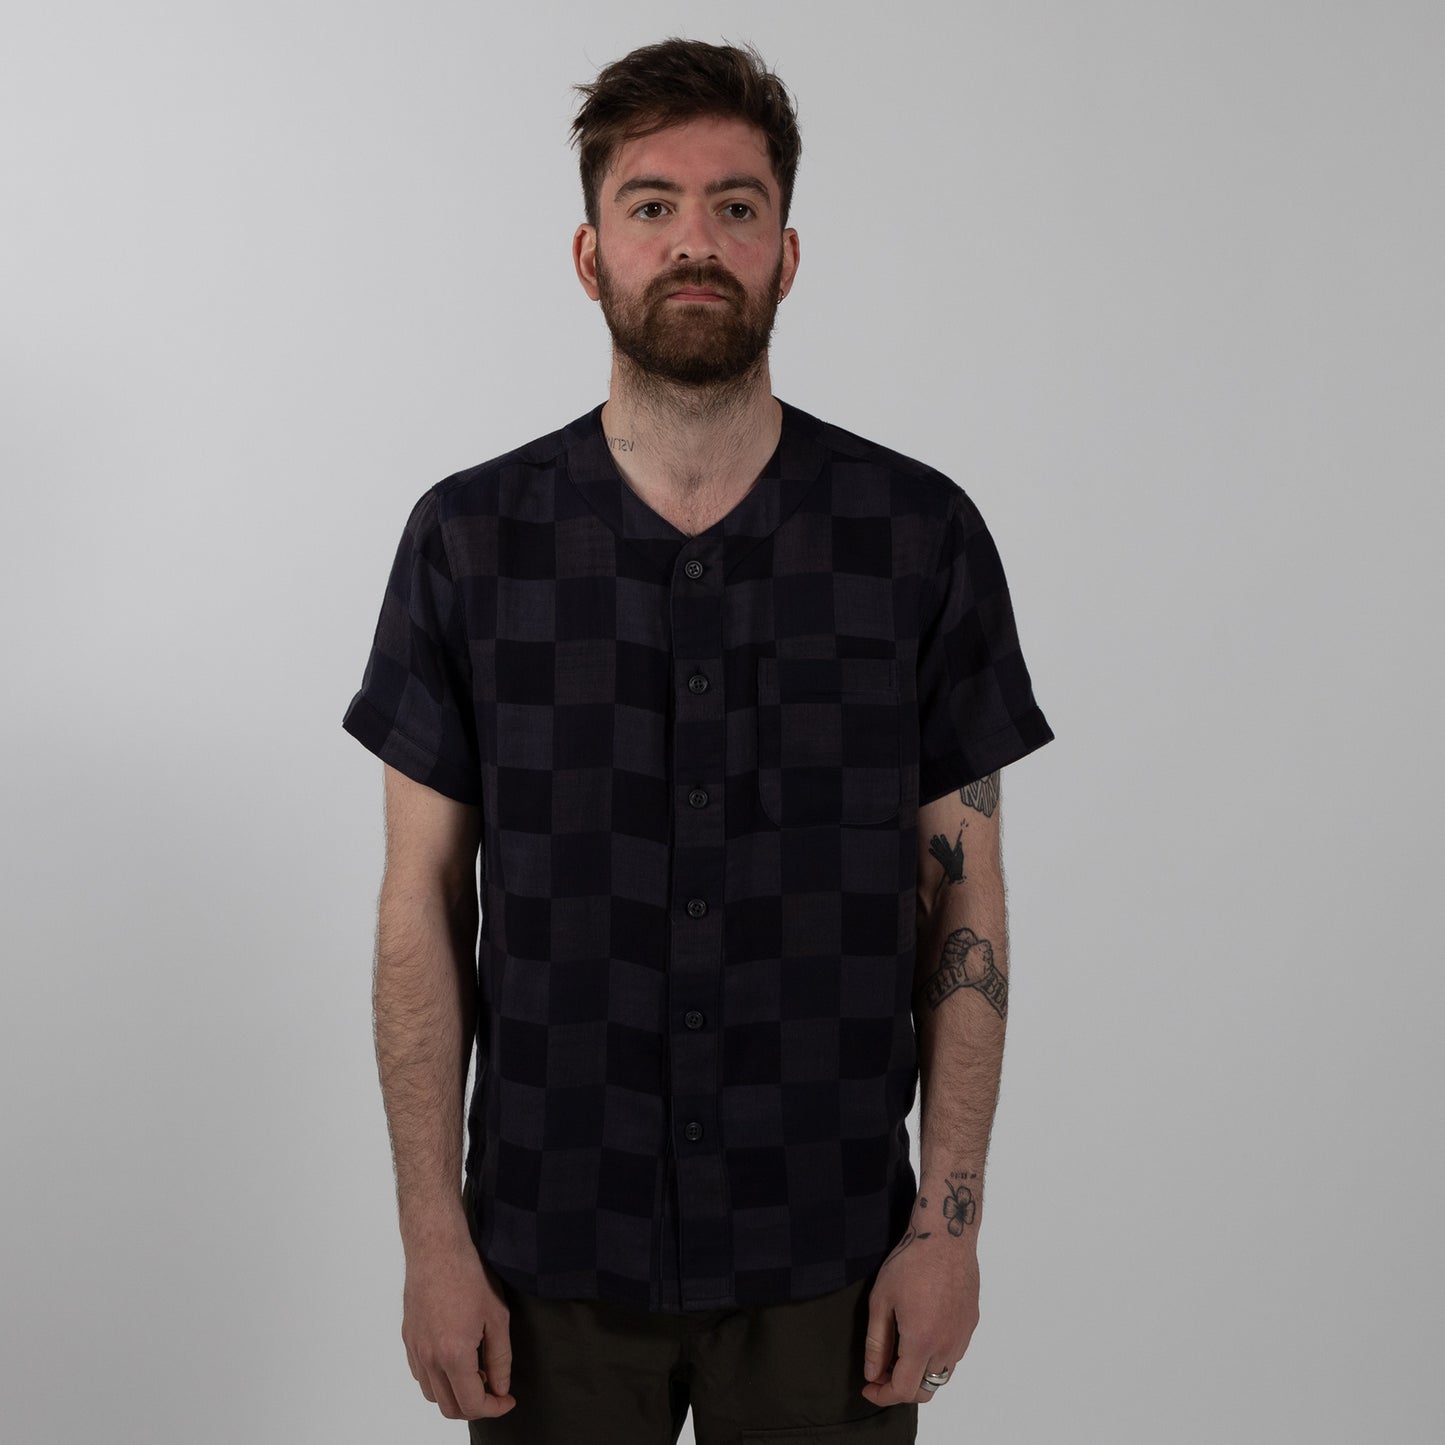 Krammer and Stoudt Baseball Shirt Black Navy Checkers Front Style